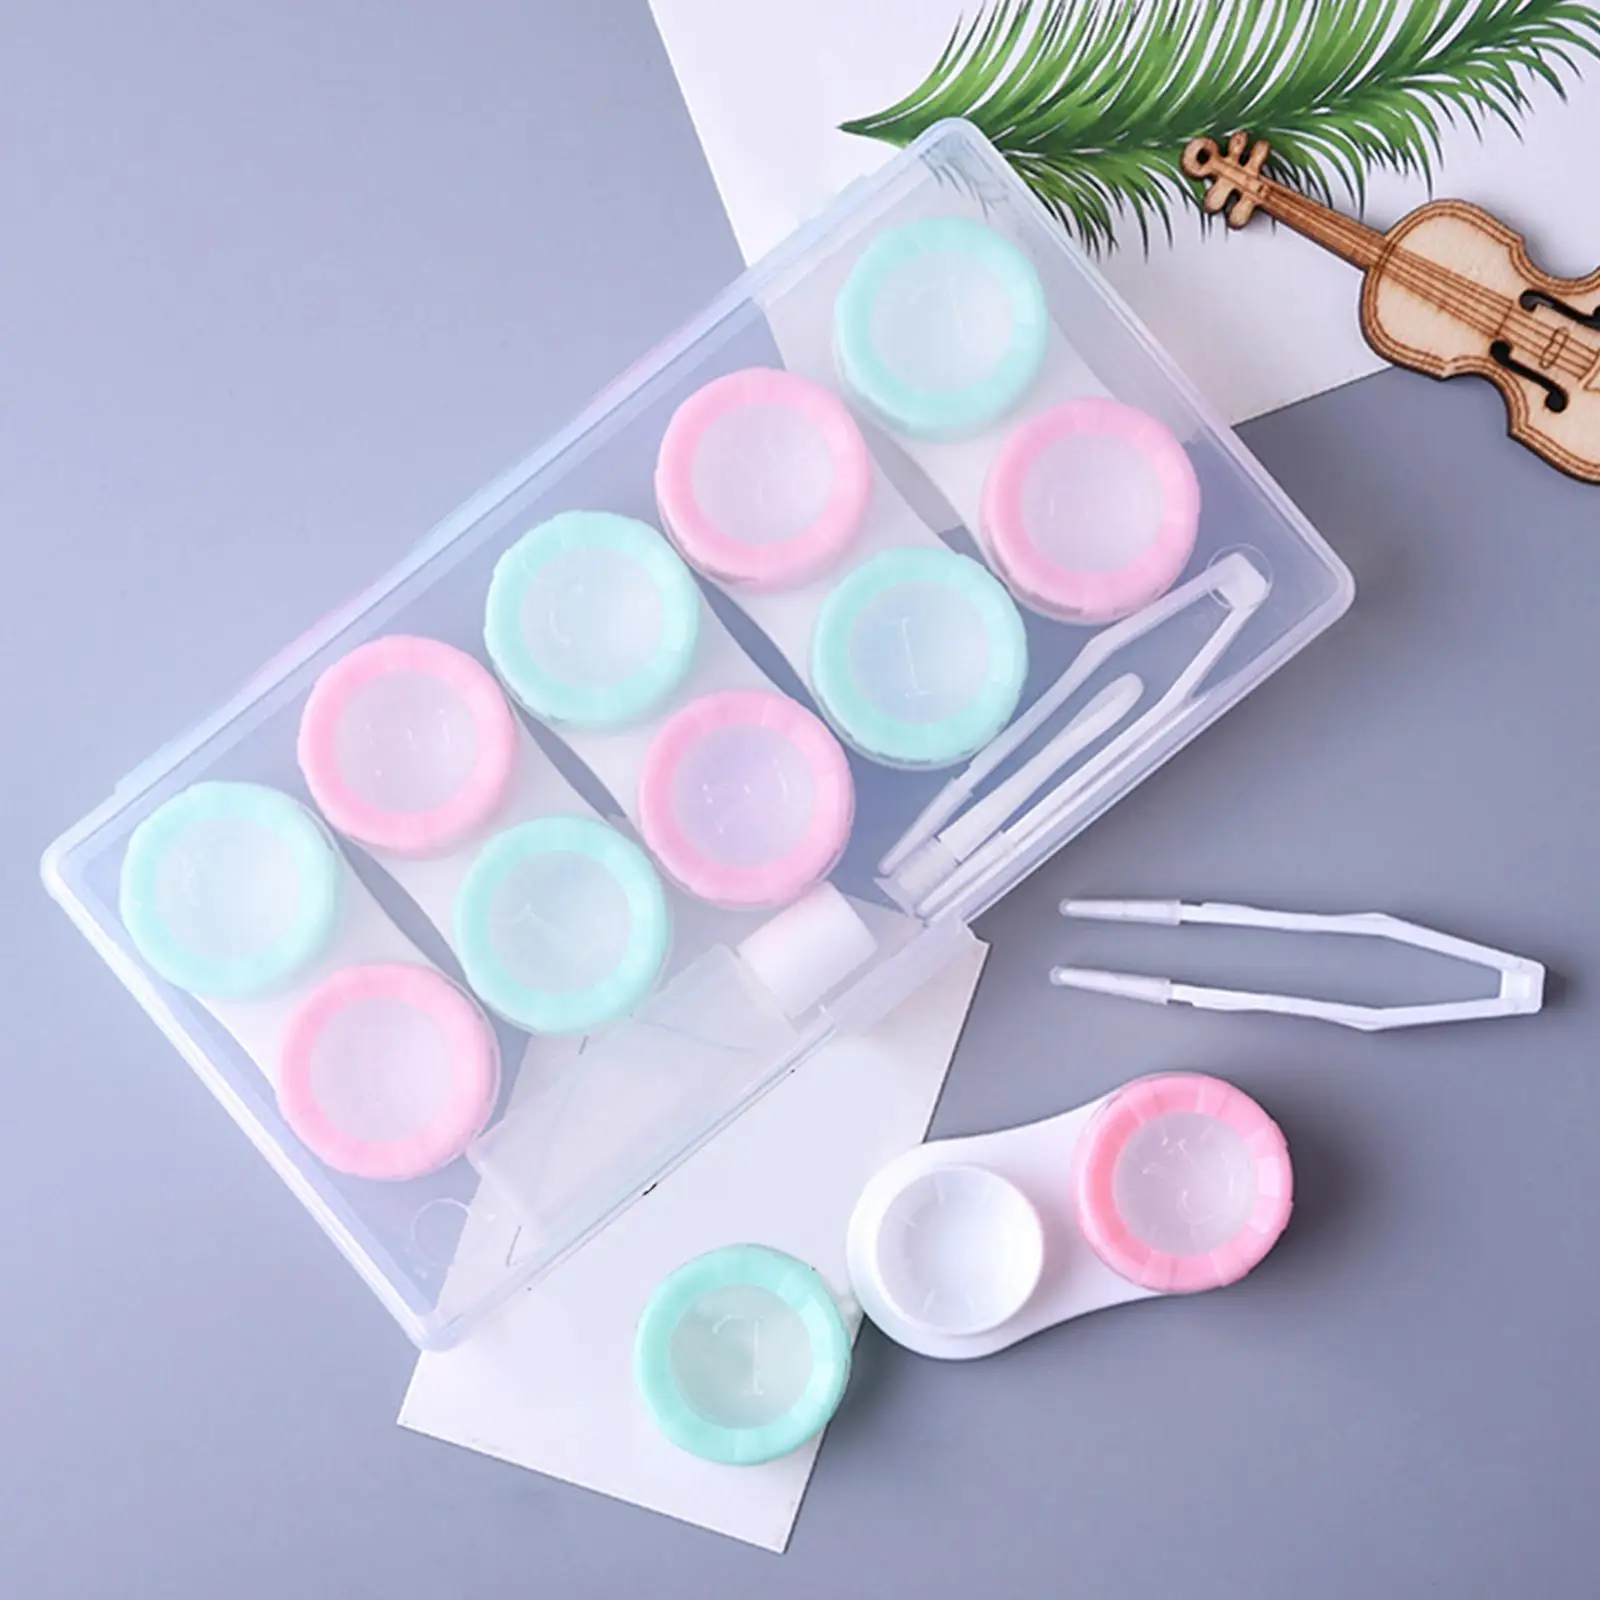 Portable 5 Pairs Contact Lens Case Container Soaking Storage Box No Leakage L R Covers Contact Lenses Glasses Holder for Women